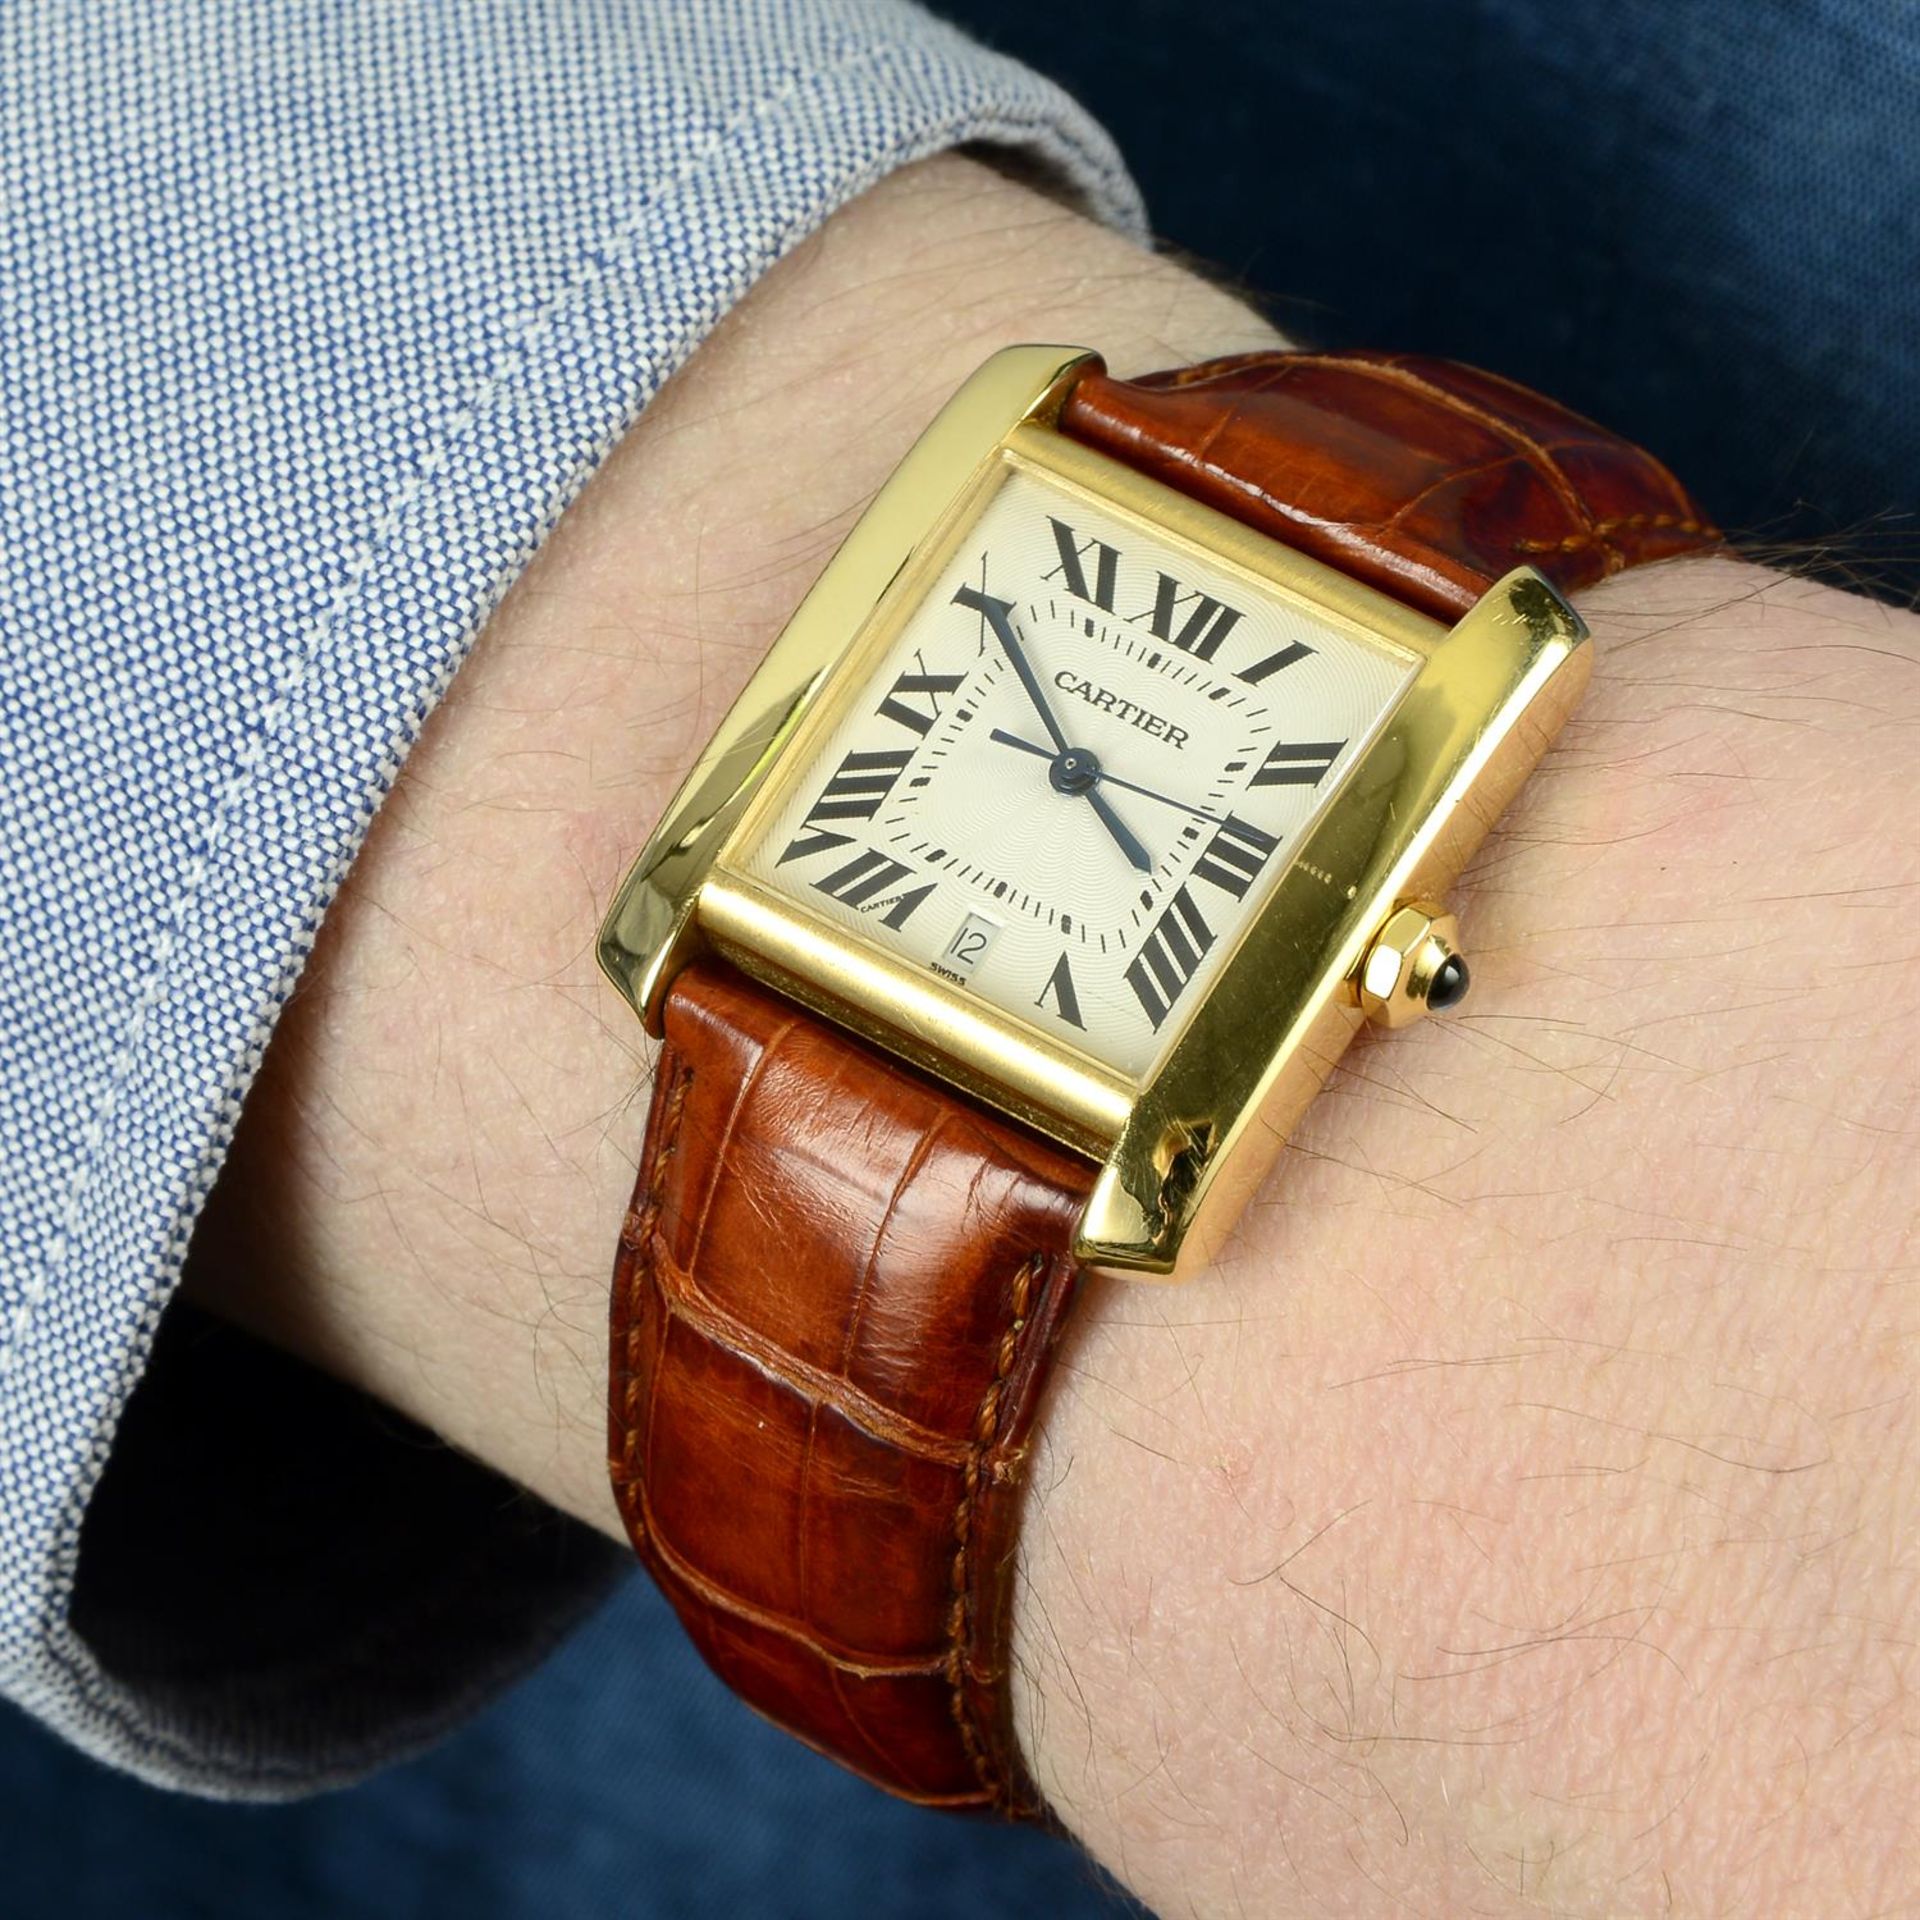 CARTIER - an 18ct yellow gold Tank Francaise 1840 wrist watch, 28x24mm. - Image 5 of 5